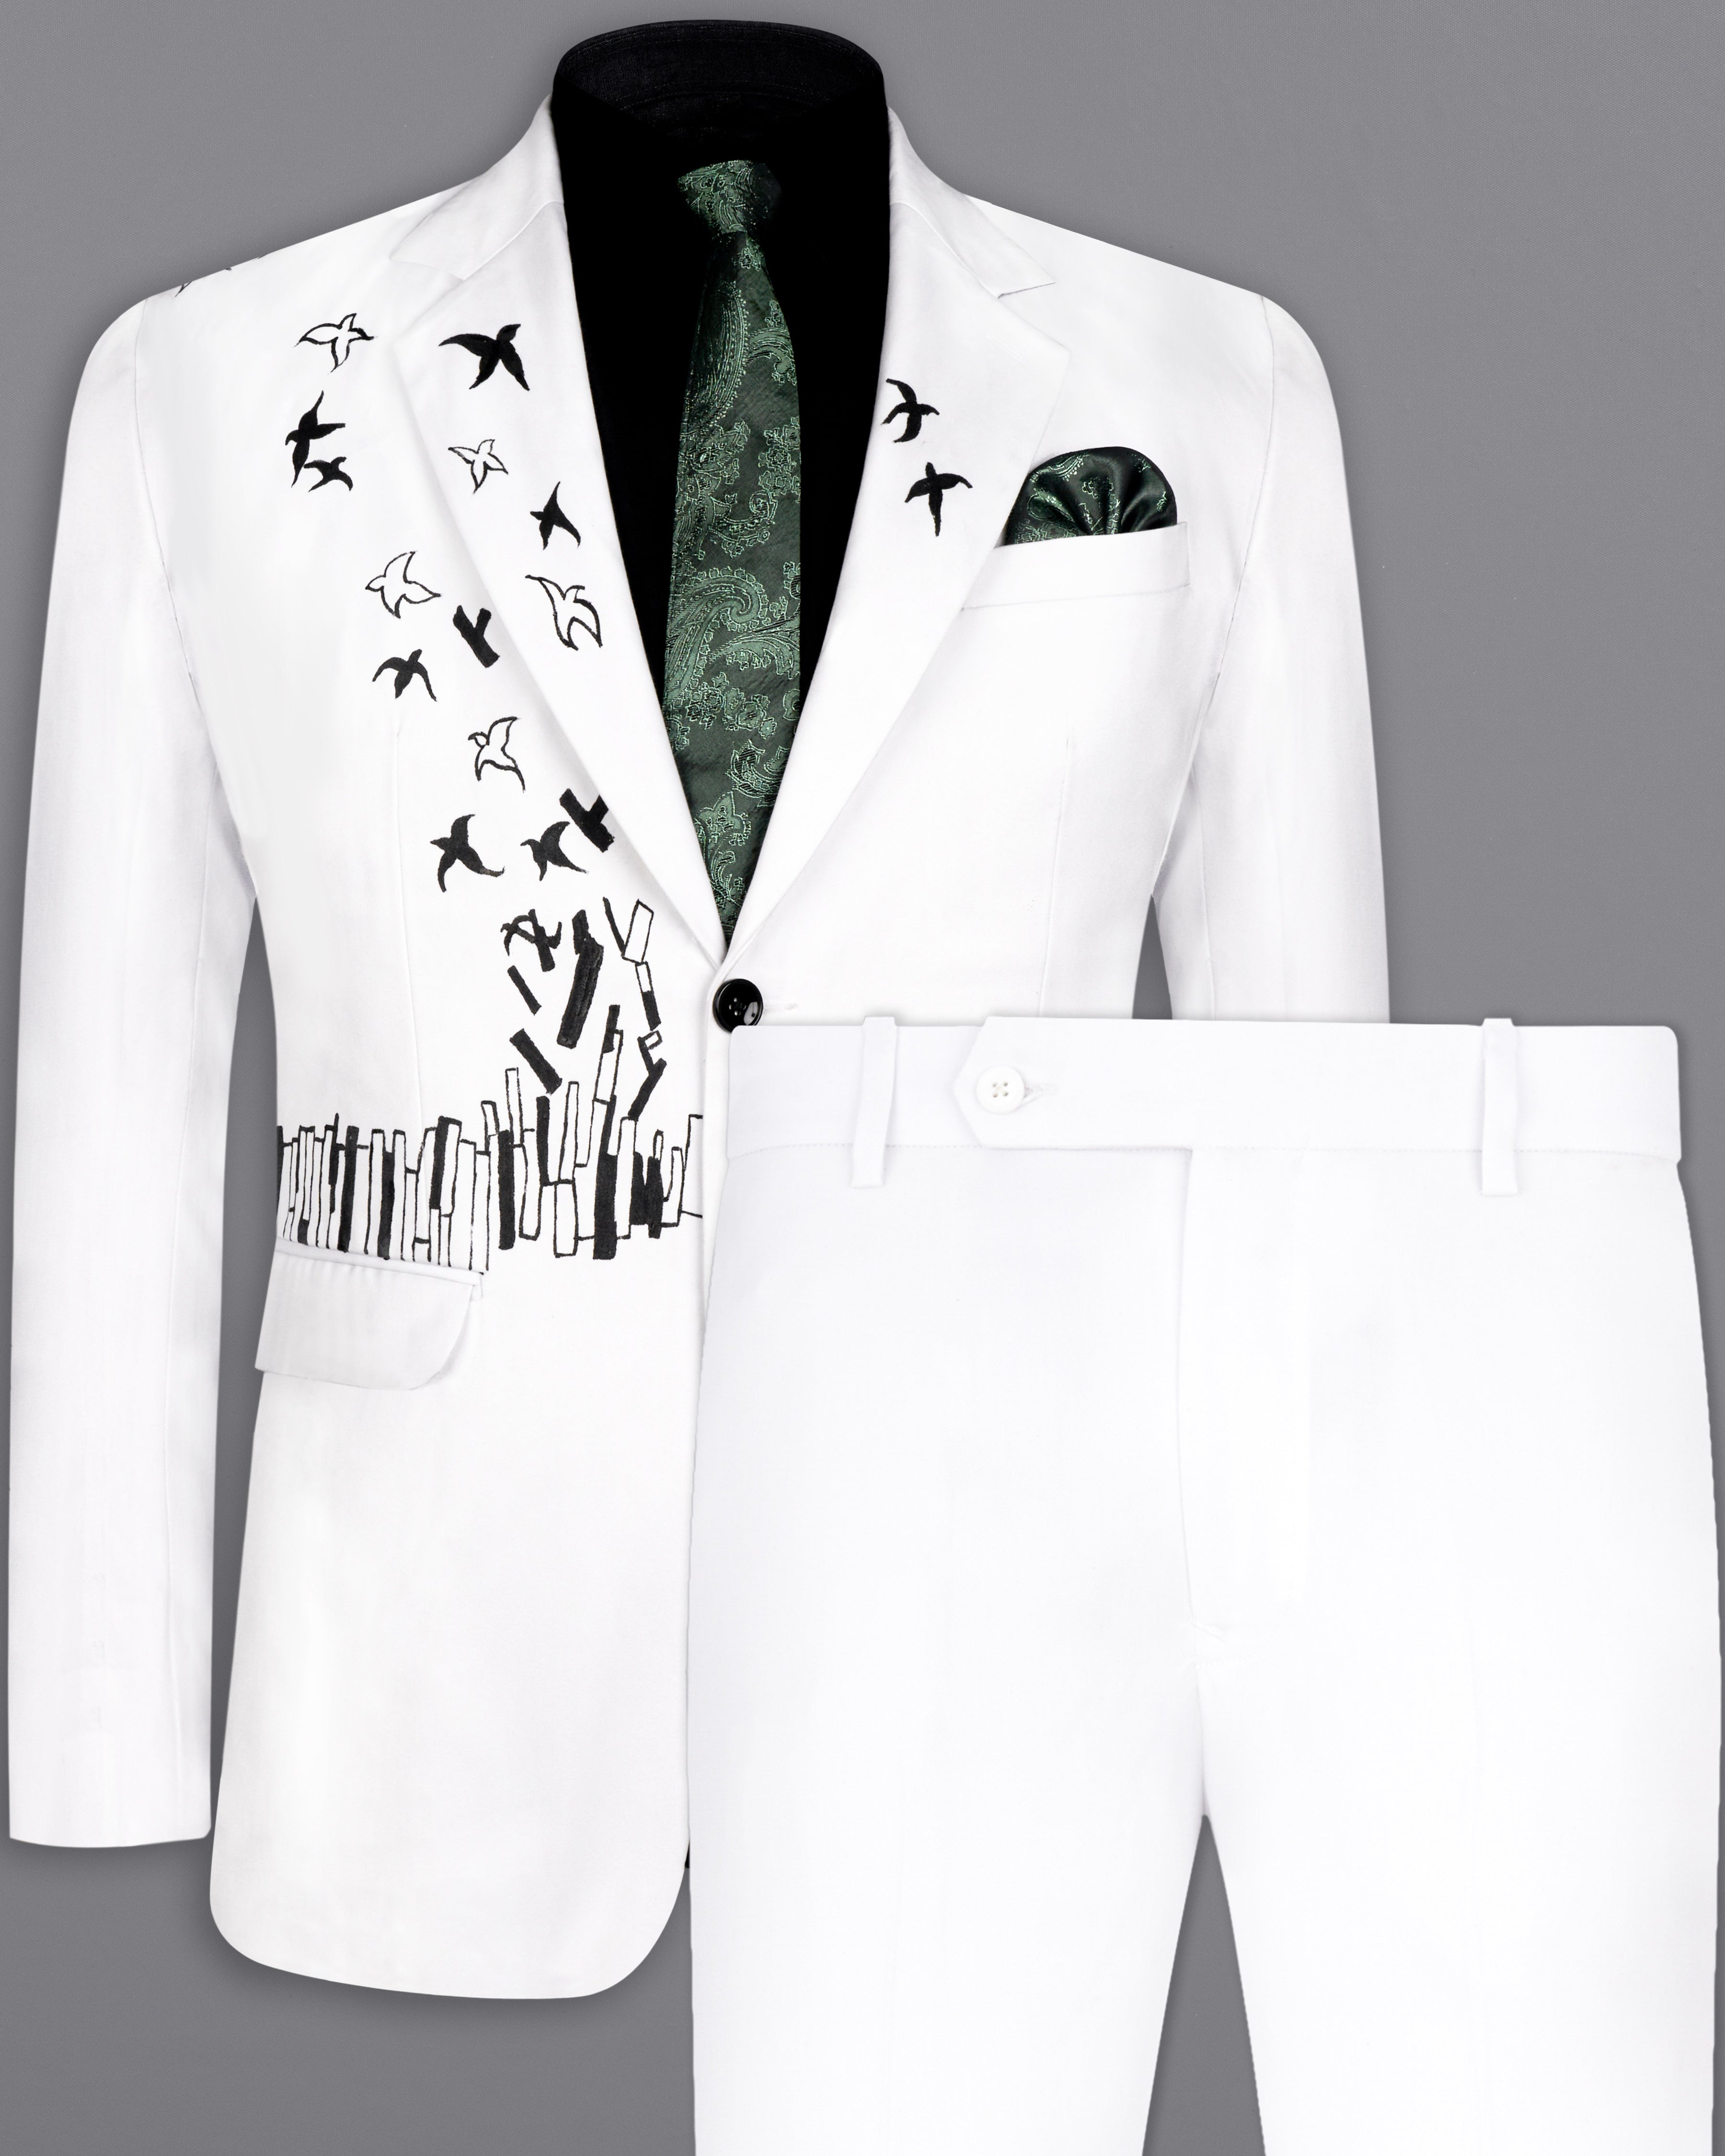 Bright White With Attractive Hand Painted Single Breasted Designer Suit ST2621-SB-ART-36, ST2621-SB-ART-38, ST2621-SB-ART-40, ST2621-SB-ART-42, ST2621-SB-ART-44, ST2621-SB-ART-46, ST2621-SB-ART-48, ST2621-SB-ART-50, ST2621-SB-ART-52, ST2621-SB-ART-54, ST2621-SB-ART-56, ST2621-SB-ART-58, ST2621-SB-ART-60